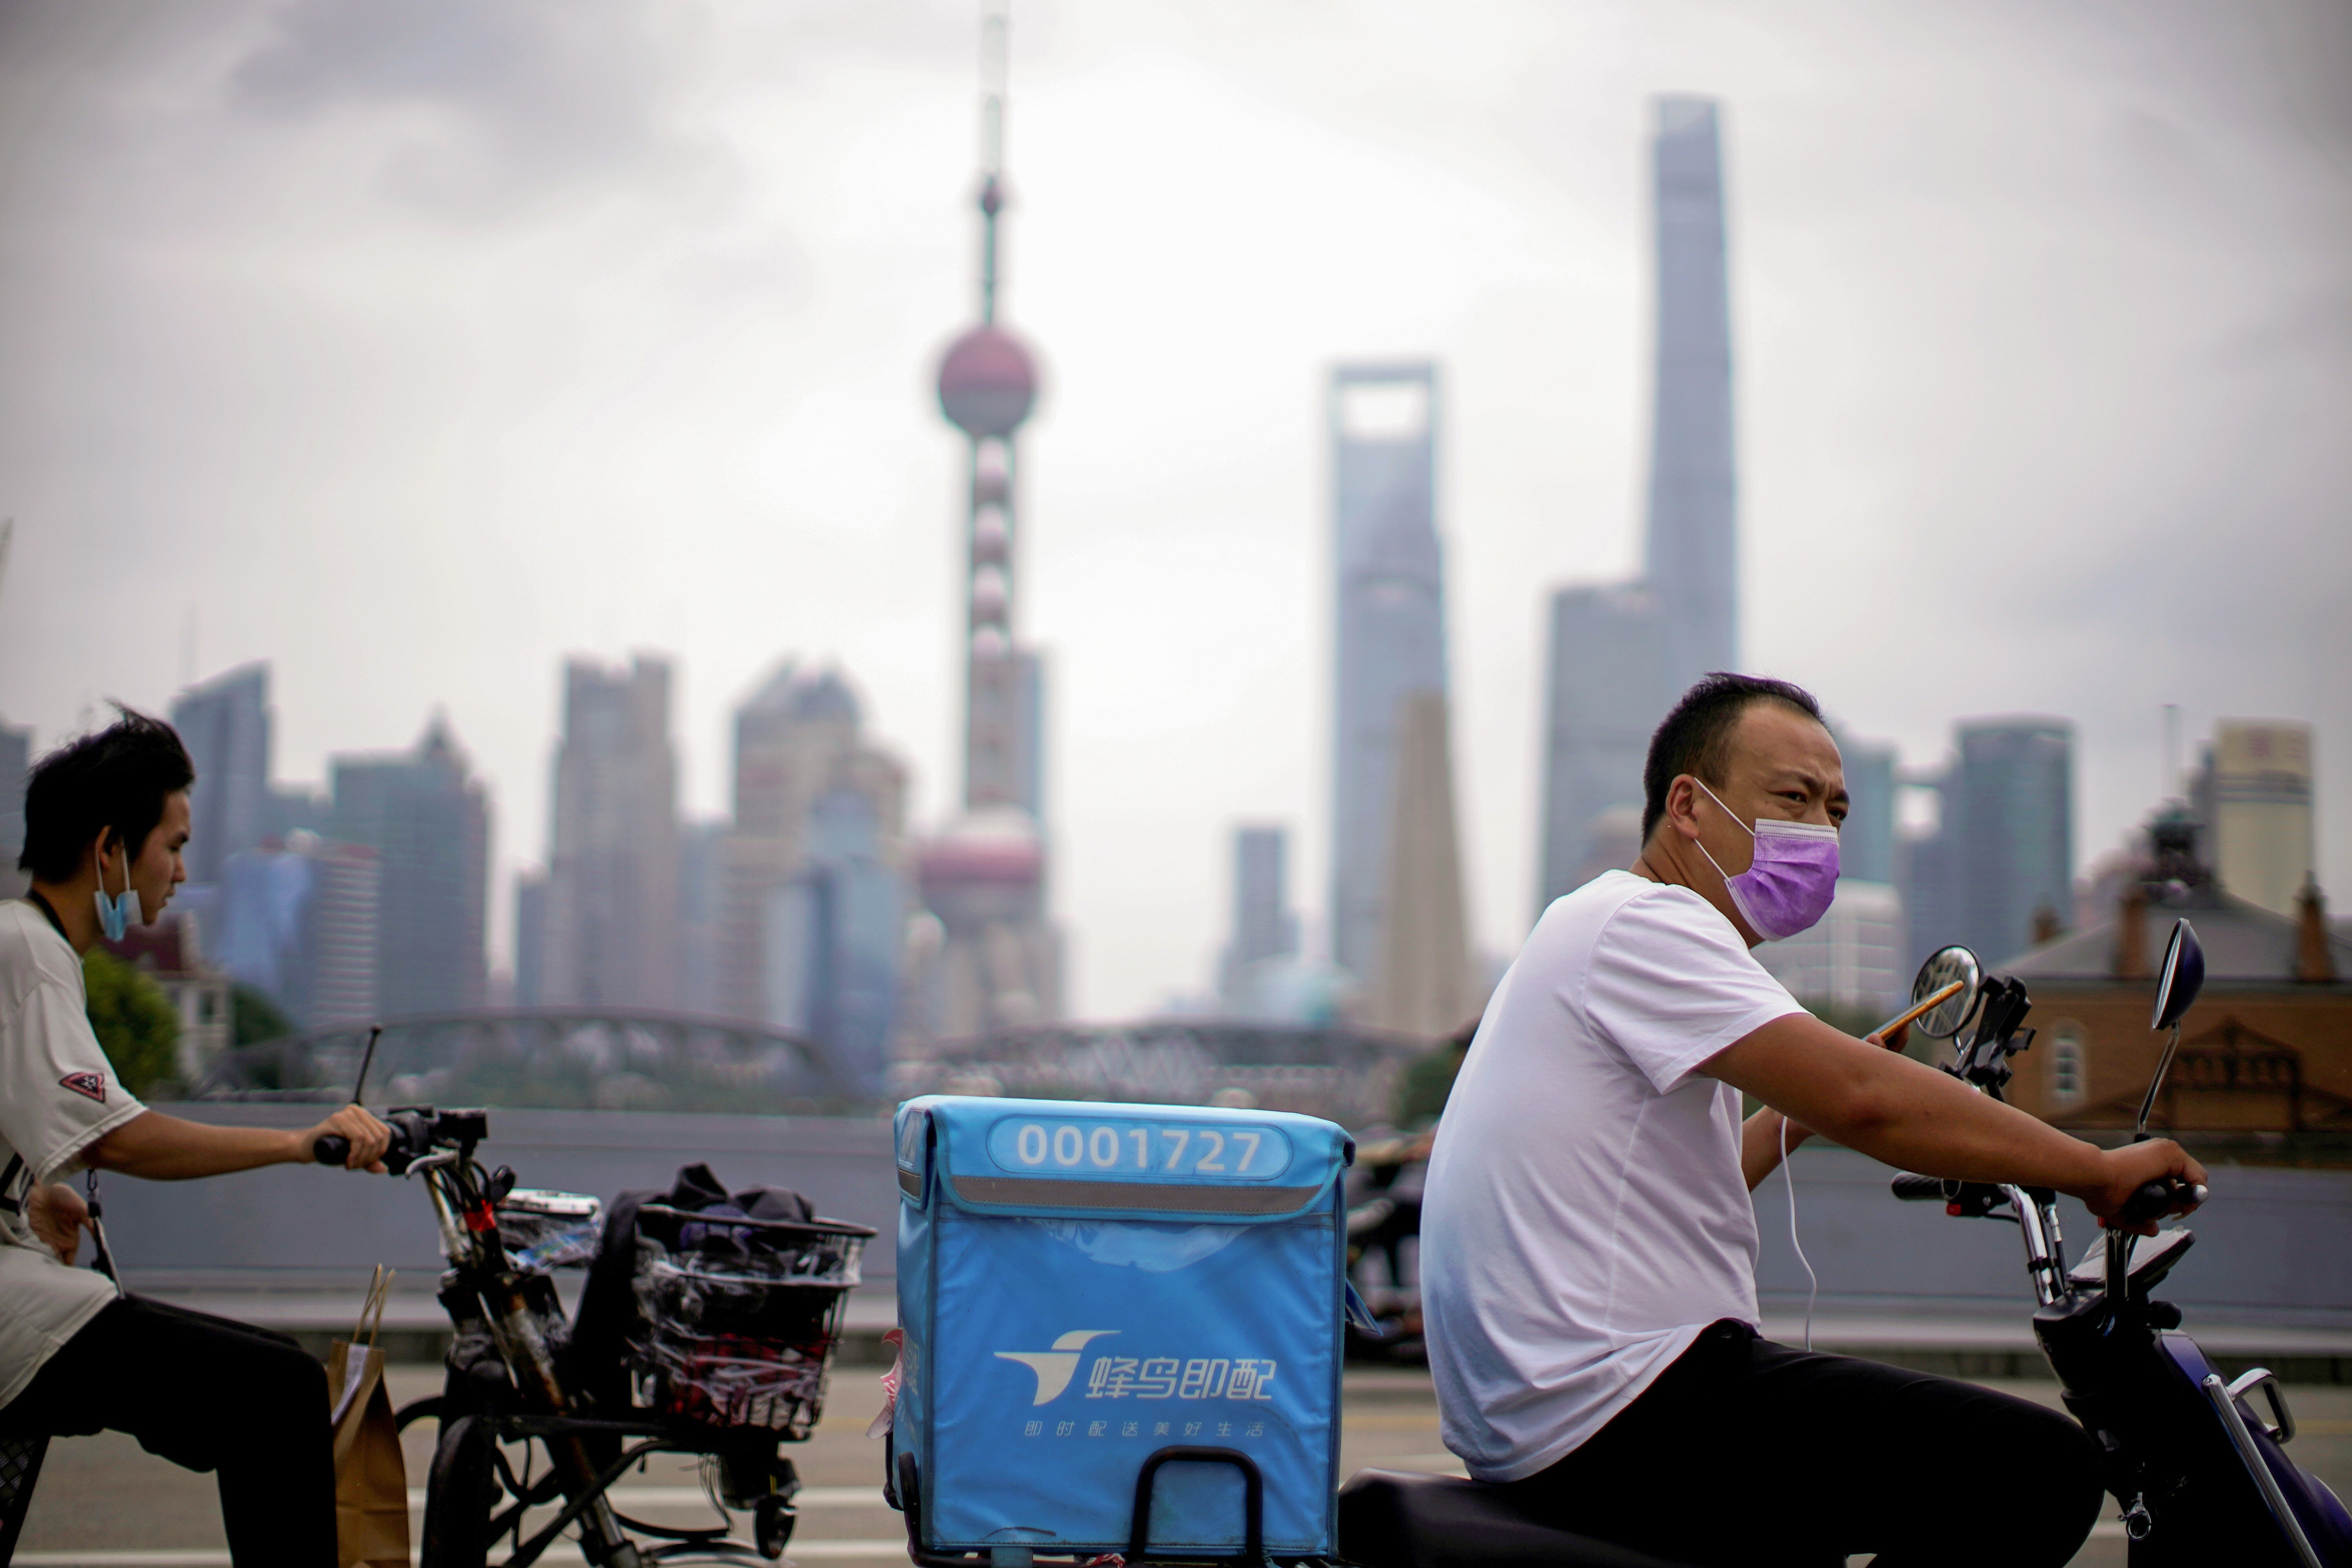 Delivery workers ride through Shanghai. During Covid-19 lockdowns, apps allowed people to buy food and other necessities without leaving their homes. Photo: Reuters